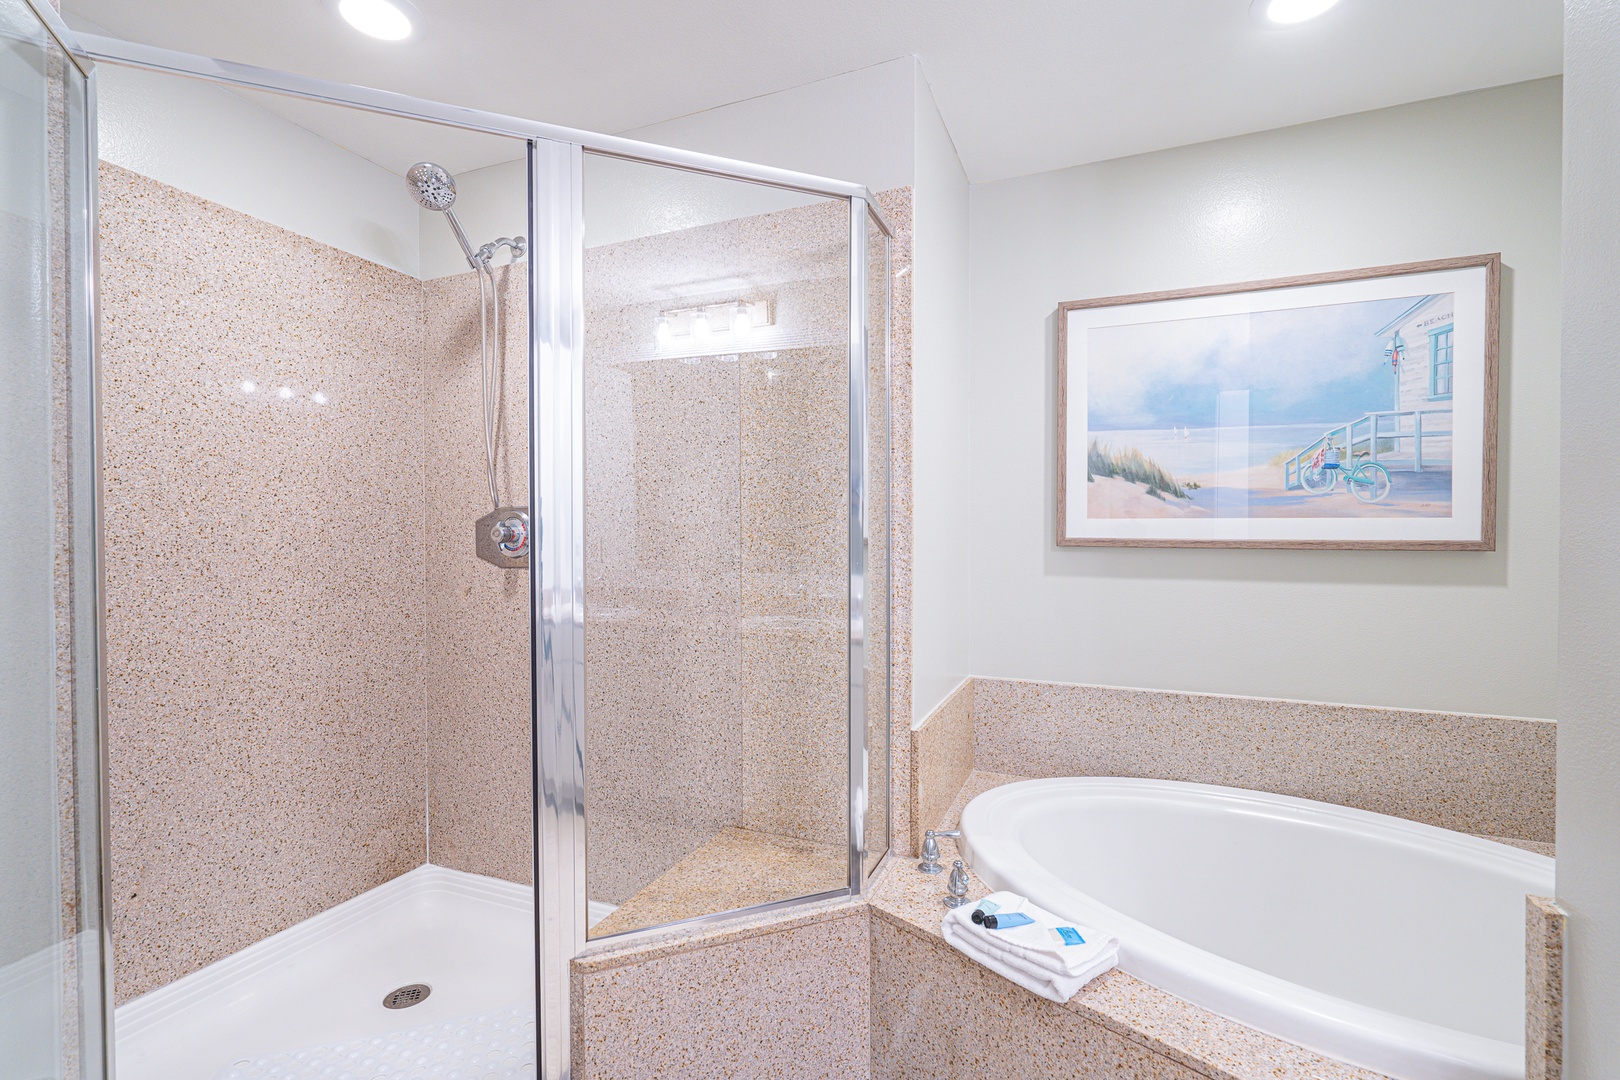 The king ensuite features a dual vanity, glass shower, & soaking tub